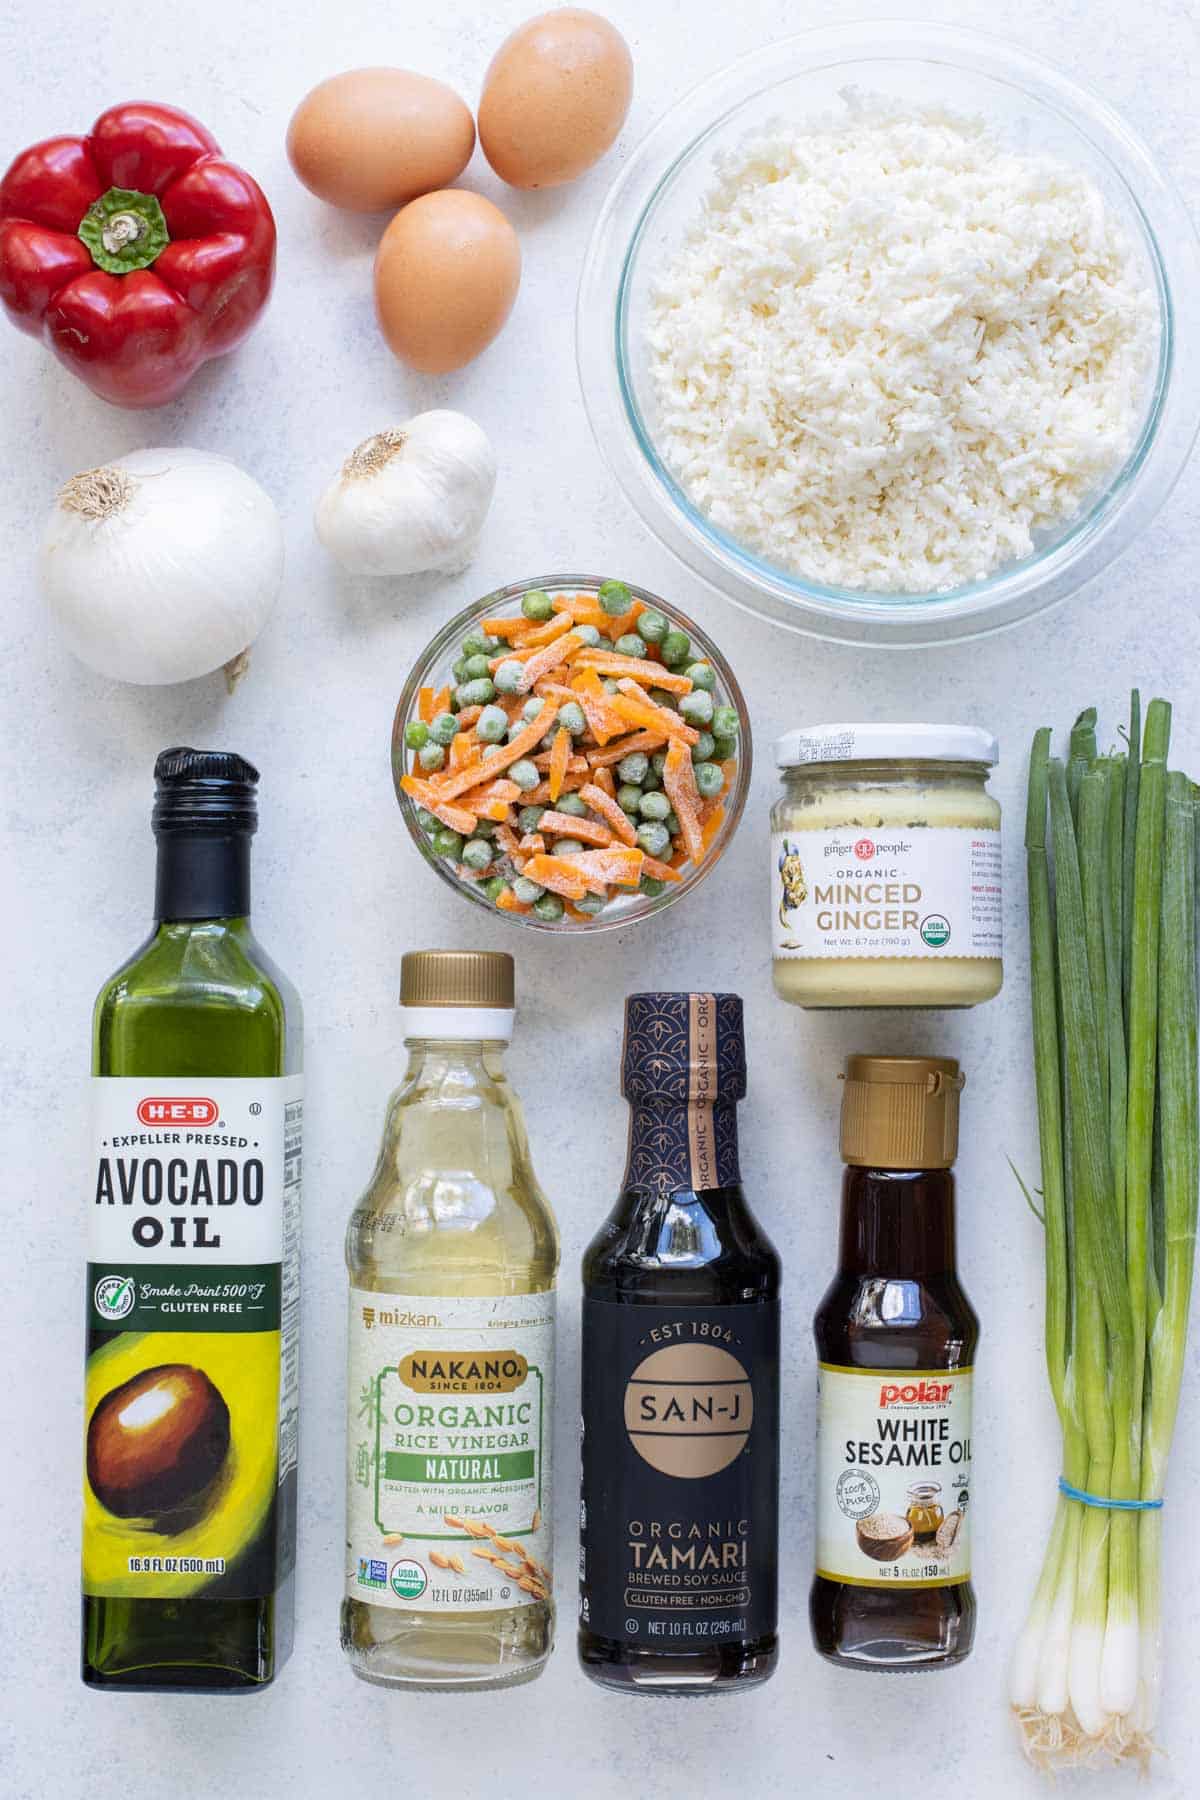 Riced cauliflower, eggs, vegetables, oils, and seasonings are the ingredients for cauliflower fried rice.